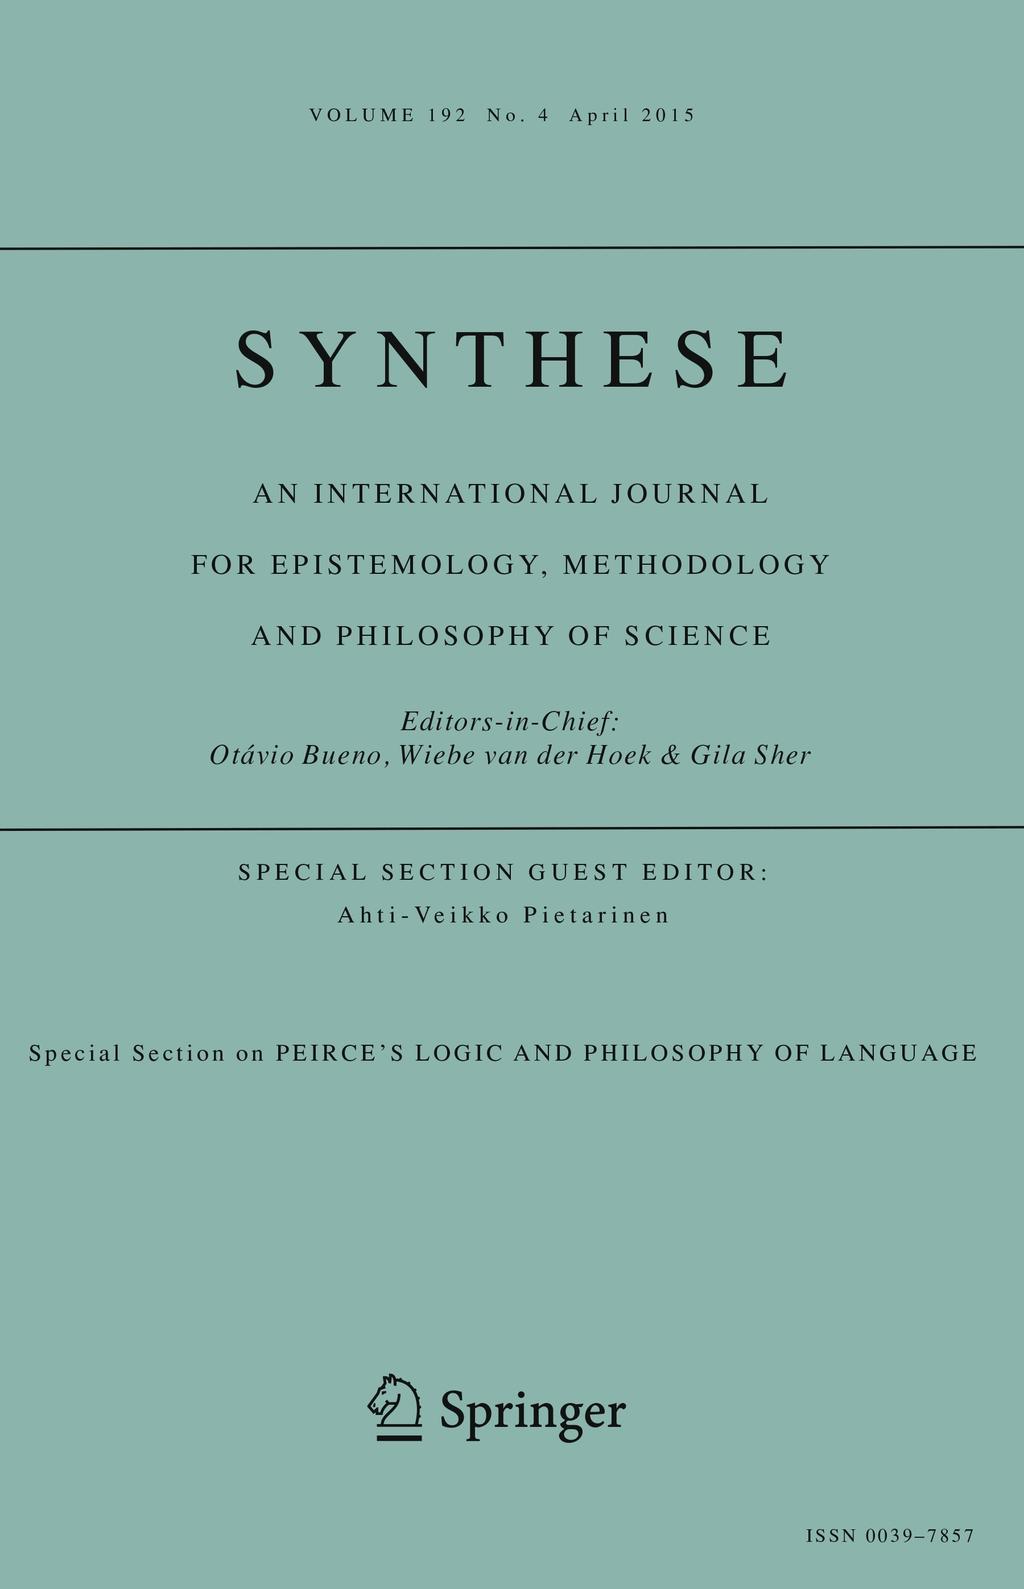 and Philosophy of Science ISSN 0039-7857 Volume 192